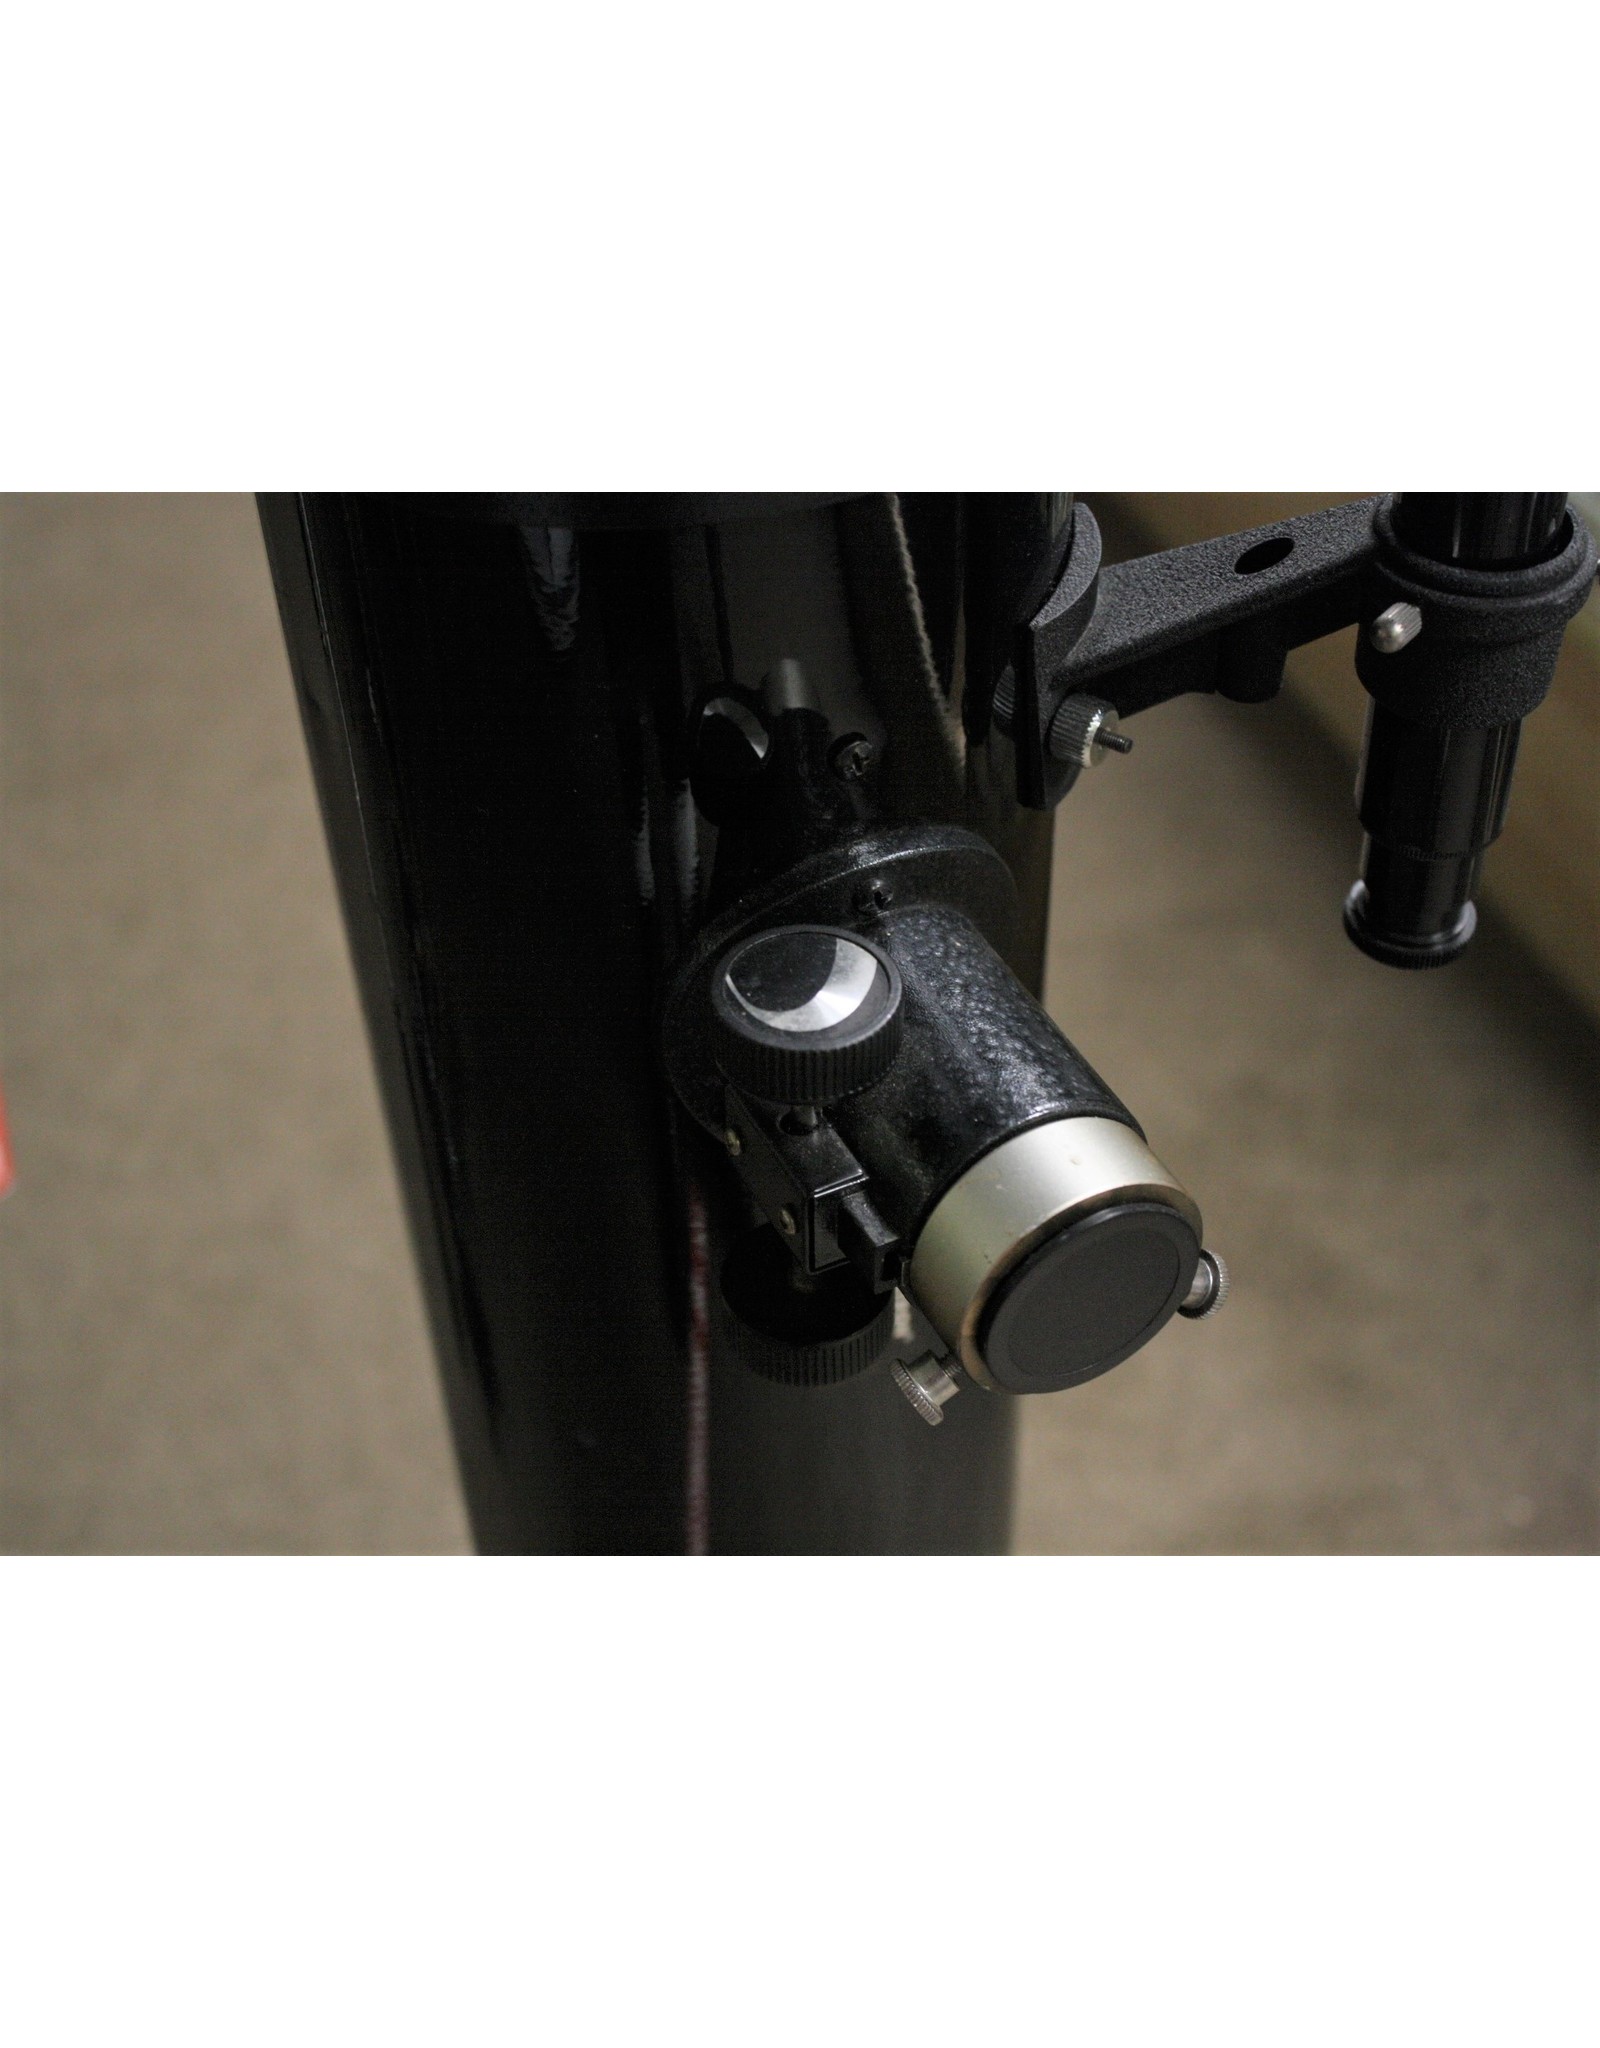 Celestron Celestron Firstscope 114 f8 OTA with Mounting rings & Dovetail Bar (Pre-owned)